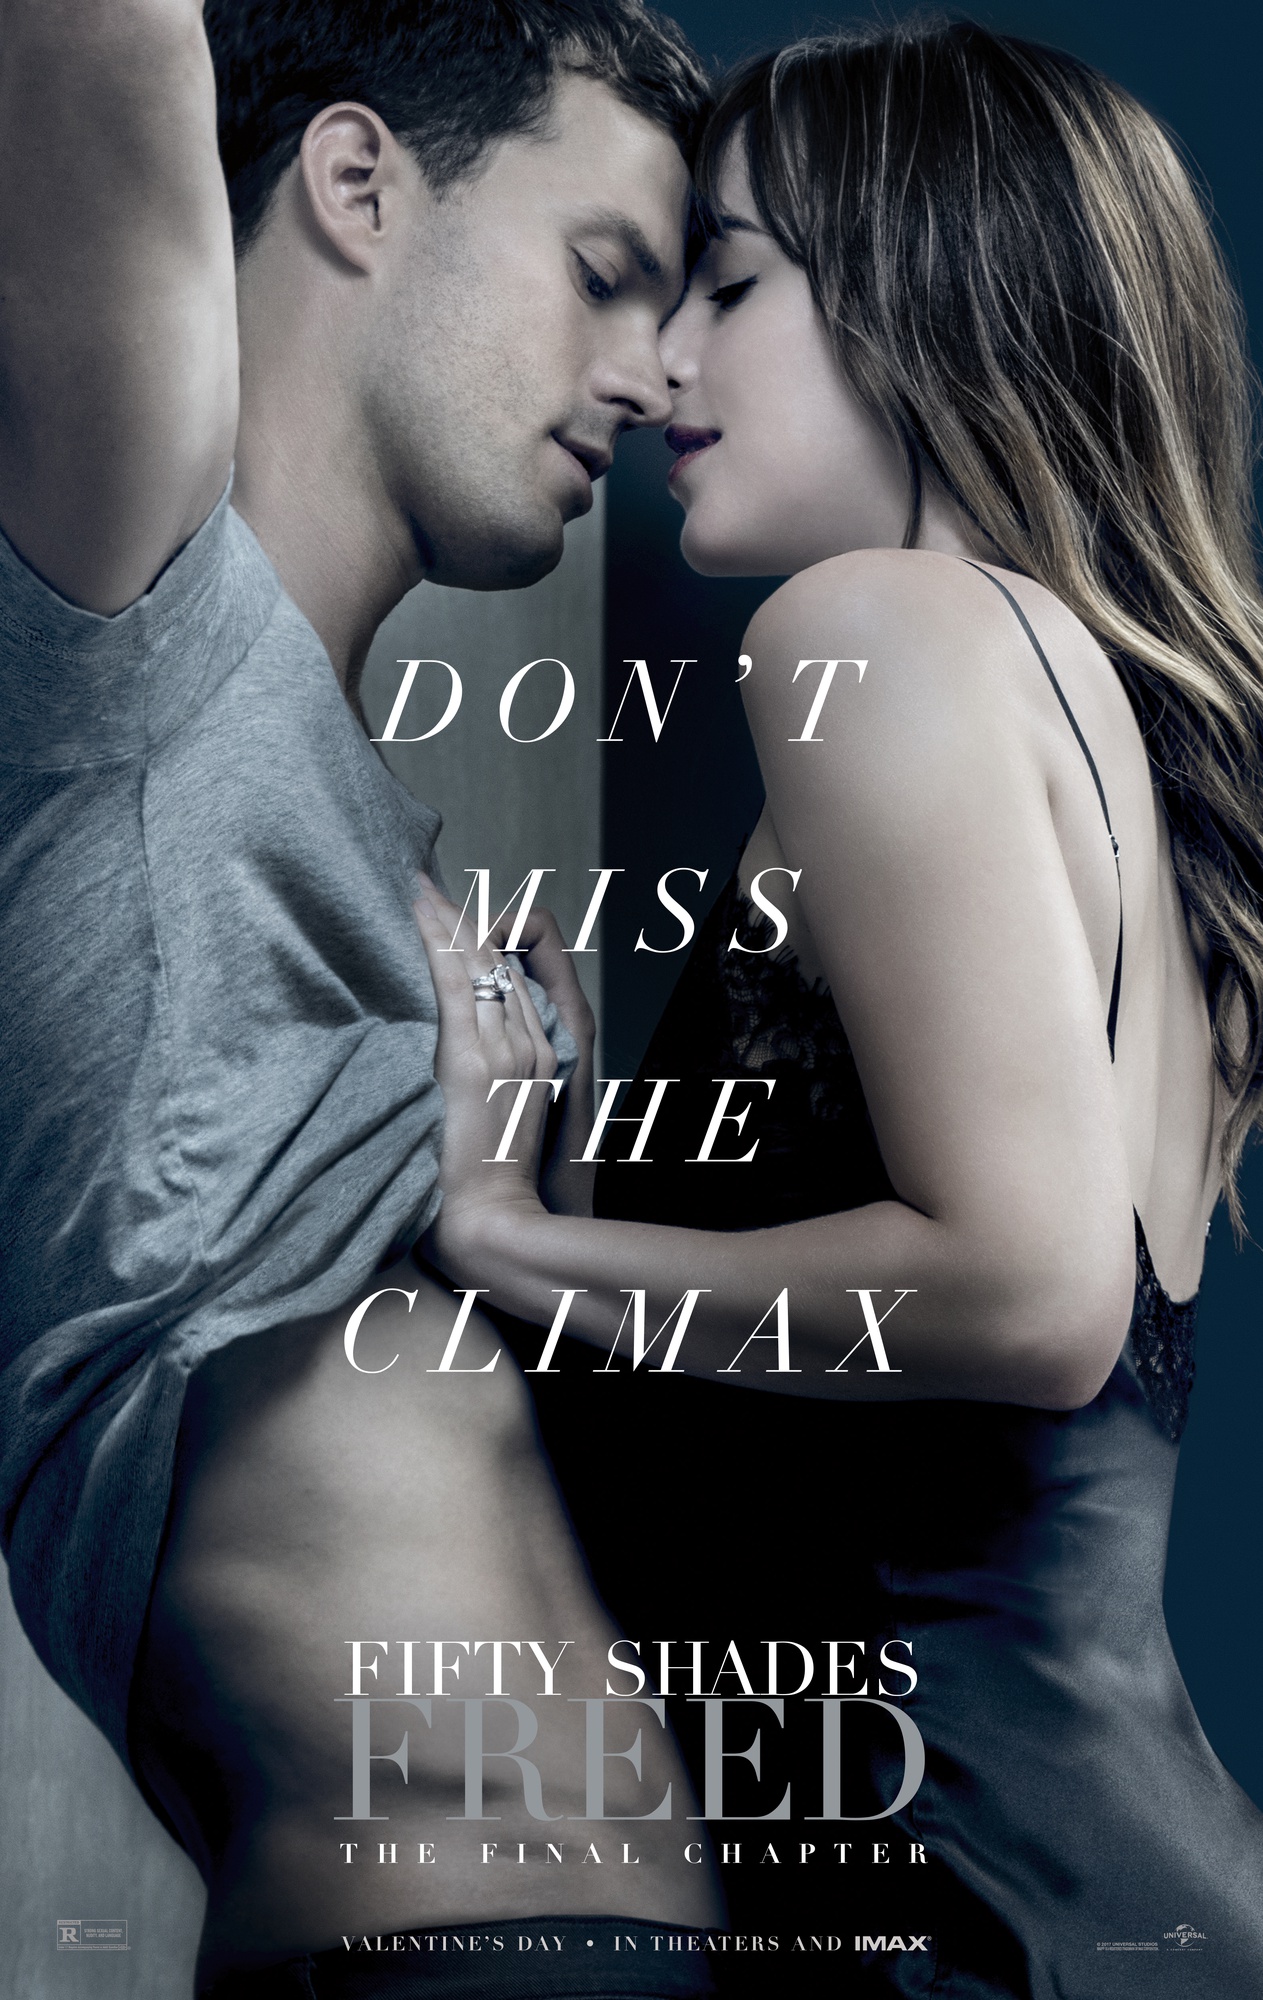 chad doherty recommends fifty shades sex chapters pic